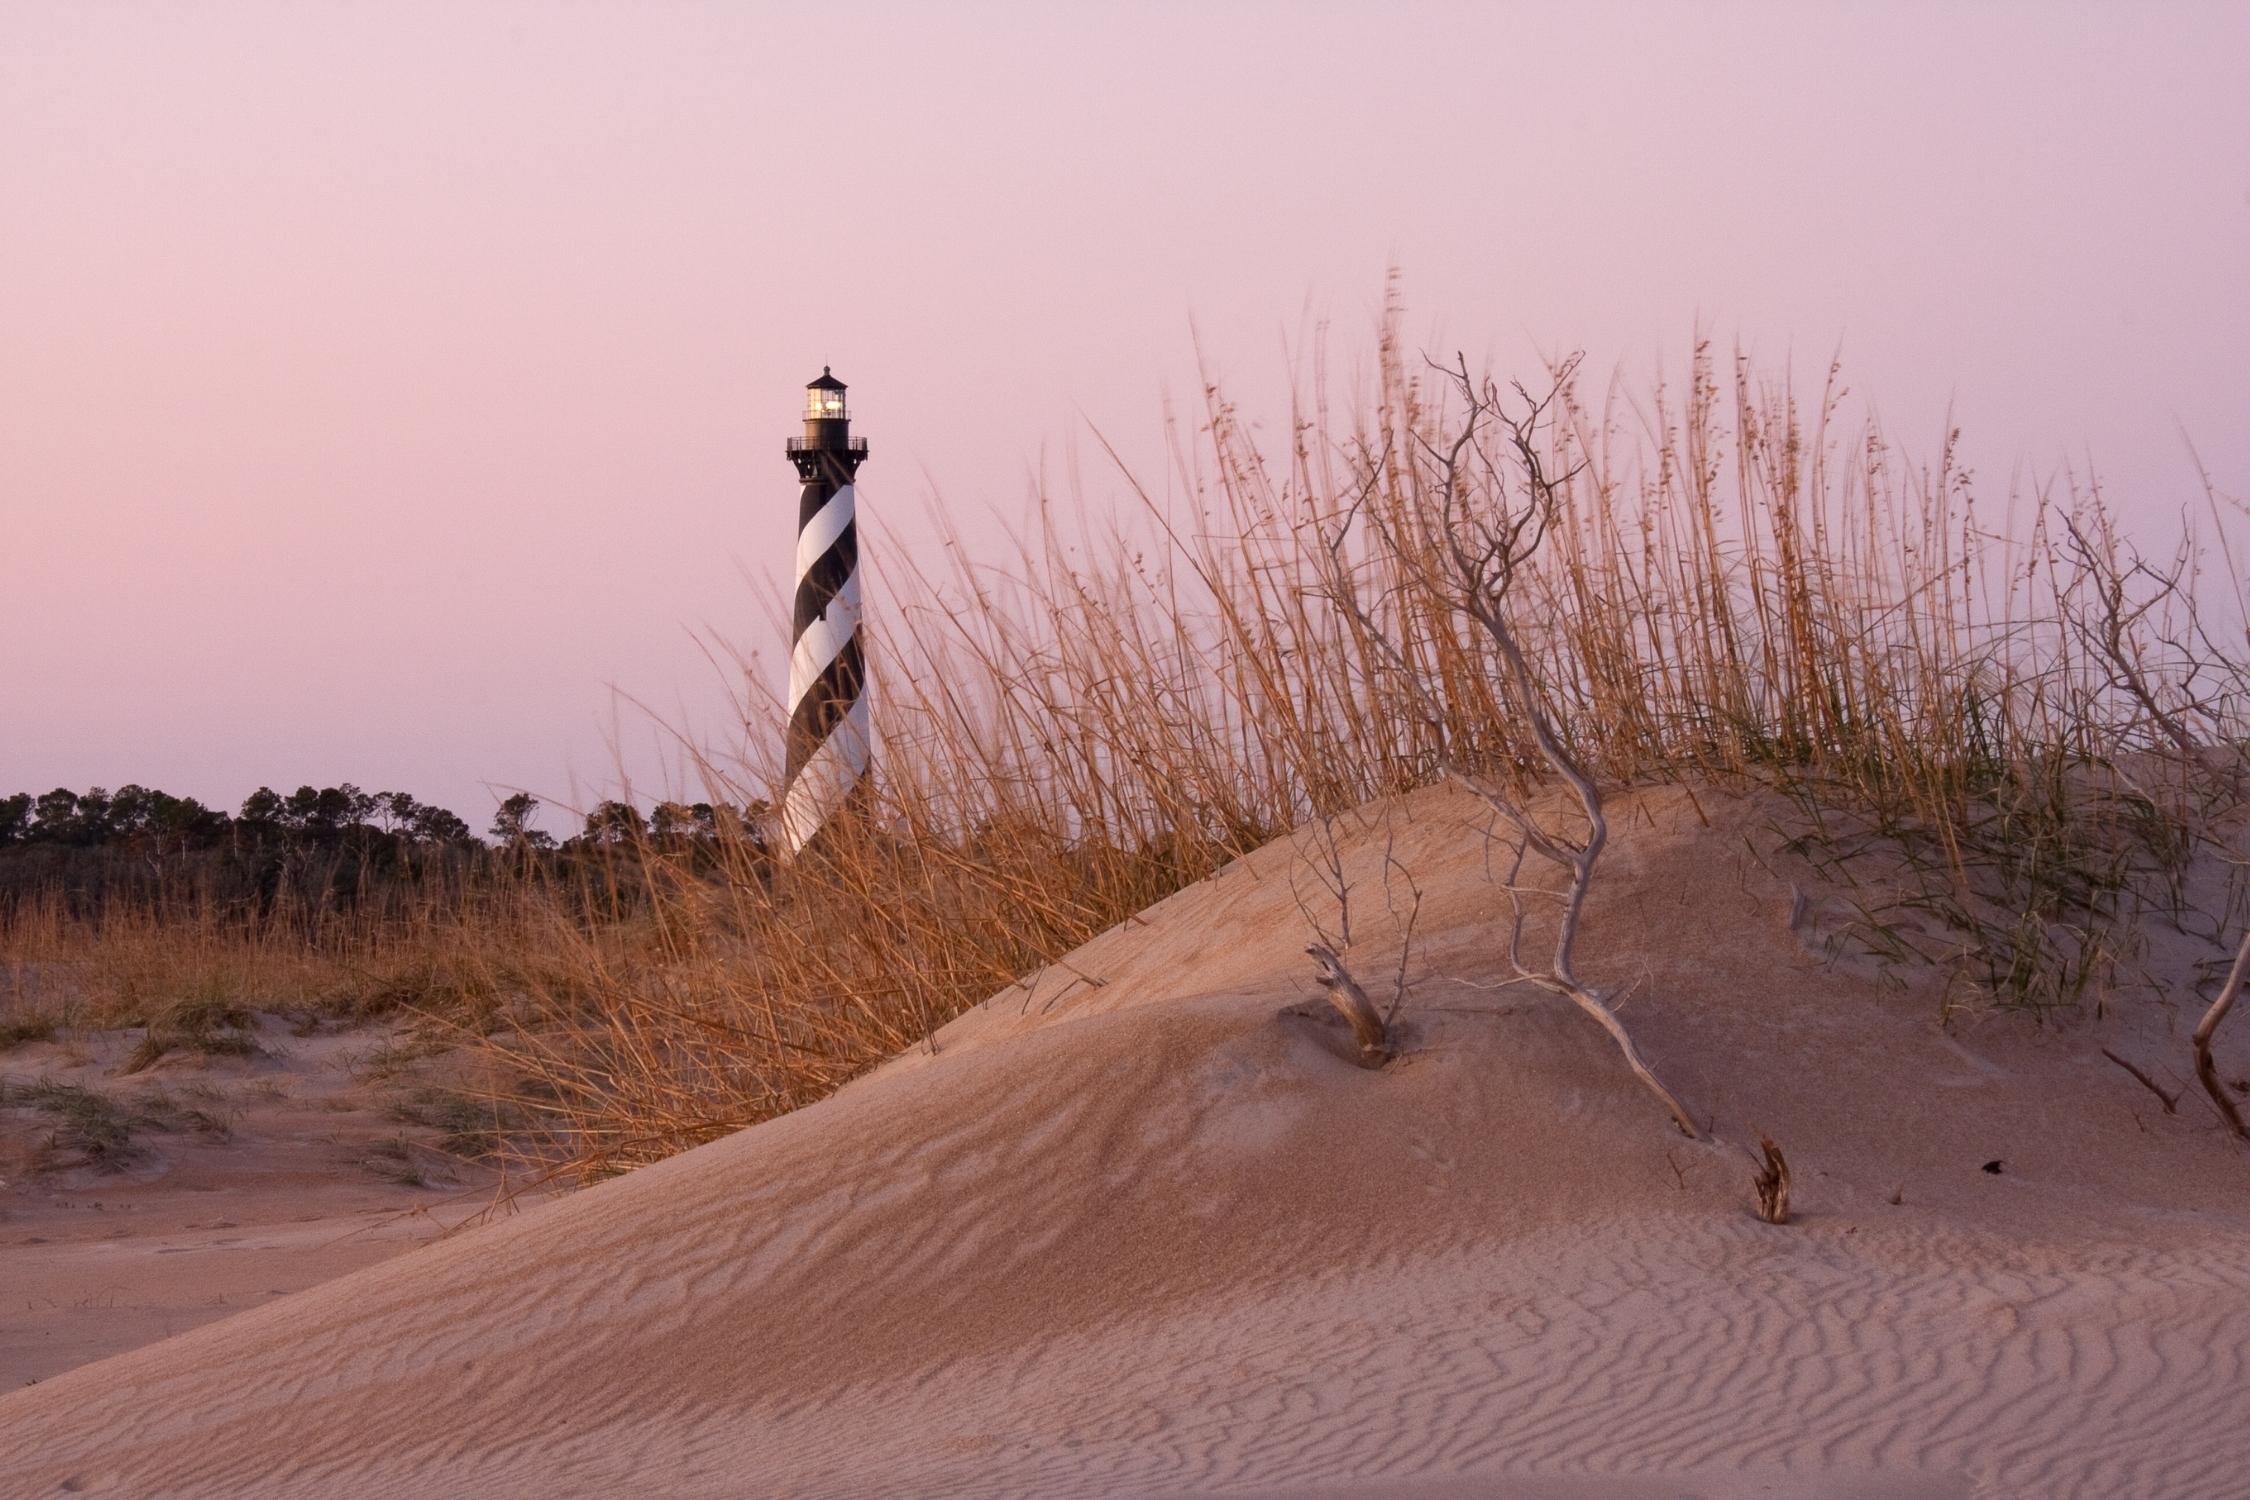 Cape Hatteras Lighthouse Behind A Sand Dune On The Outer Banks